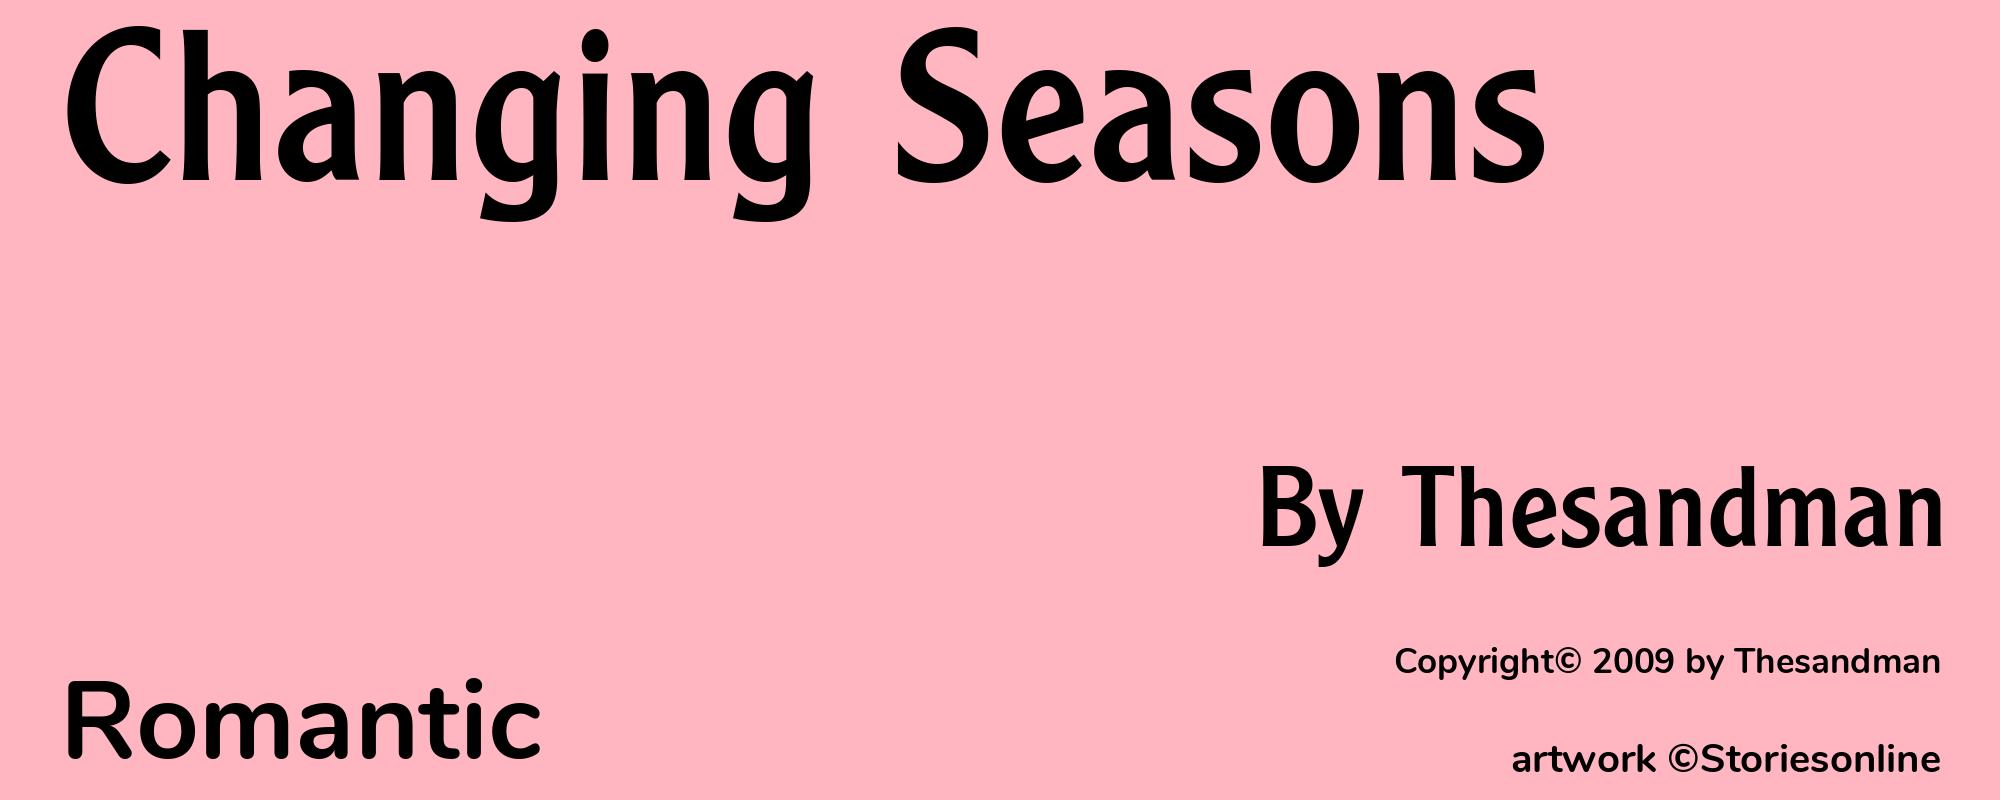 Changing Seasons - Cover